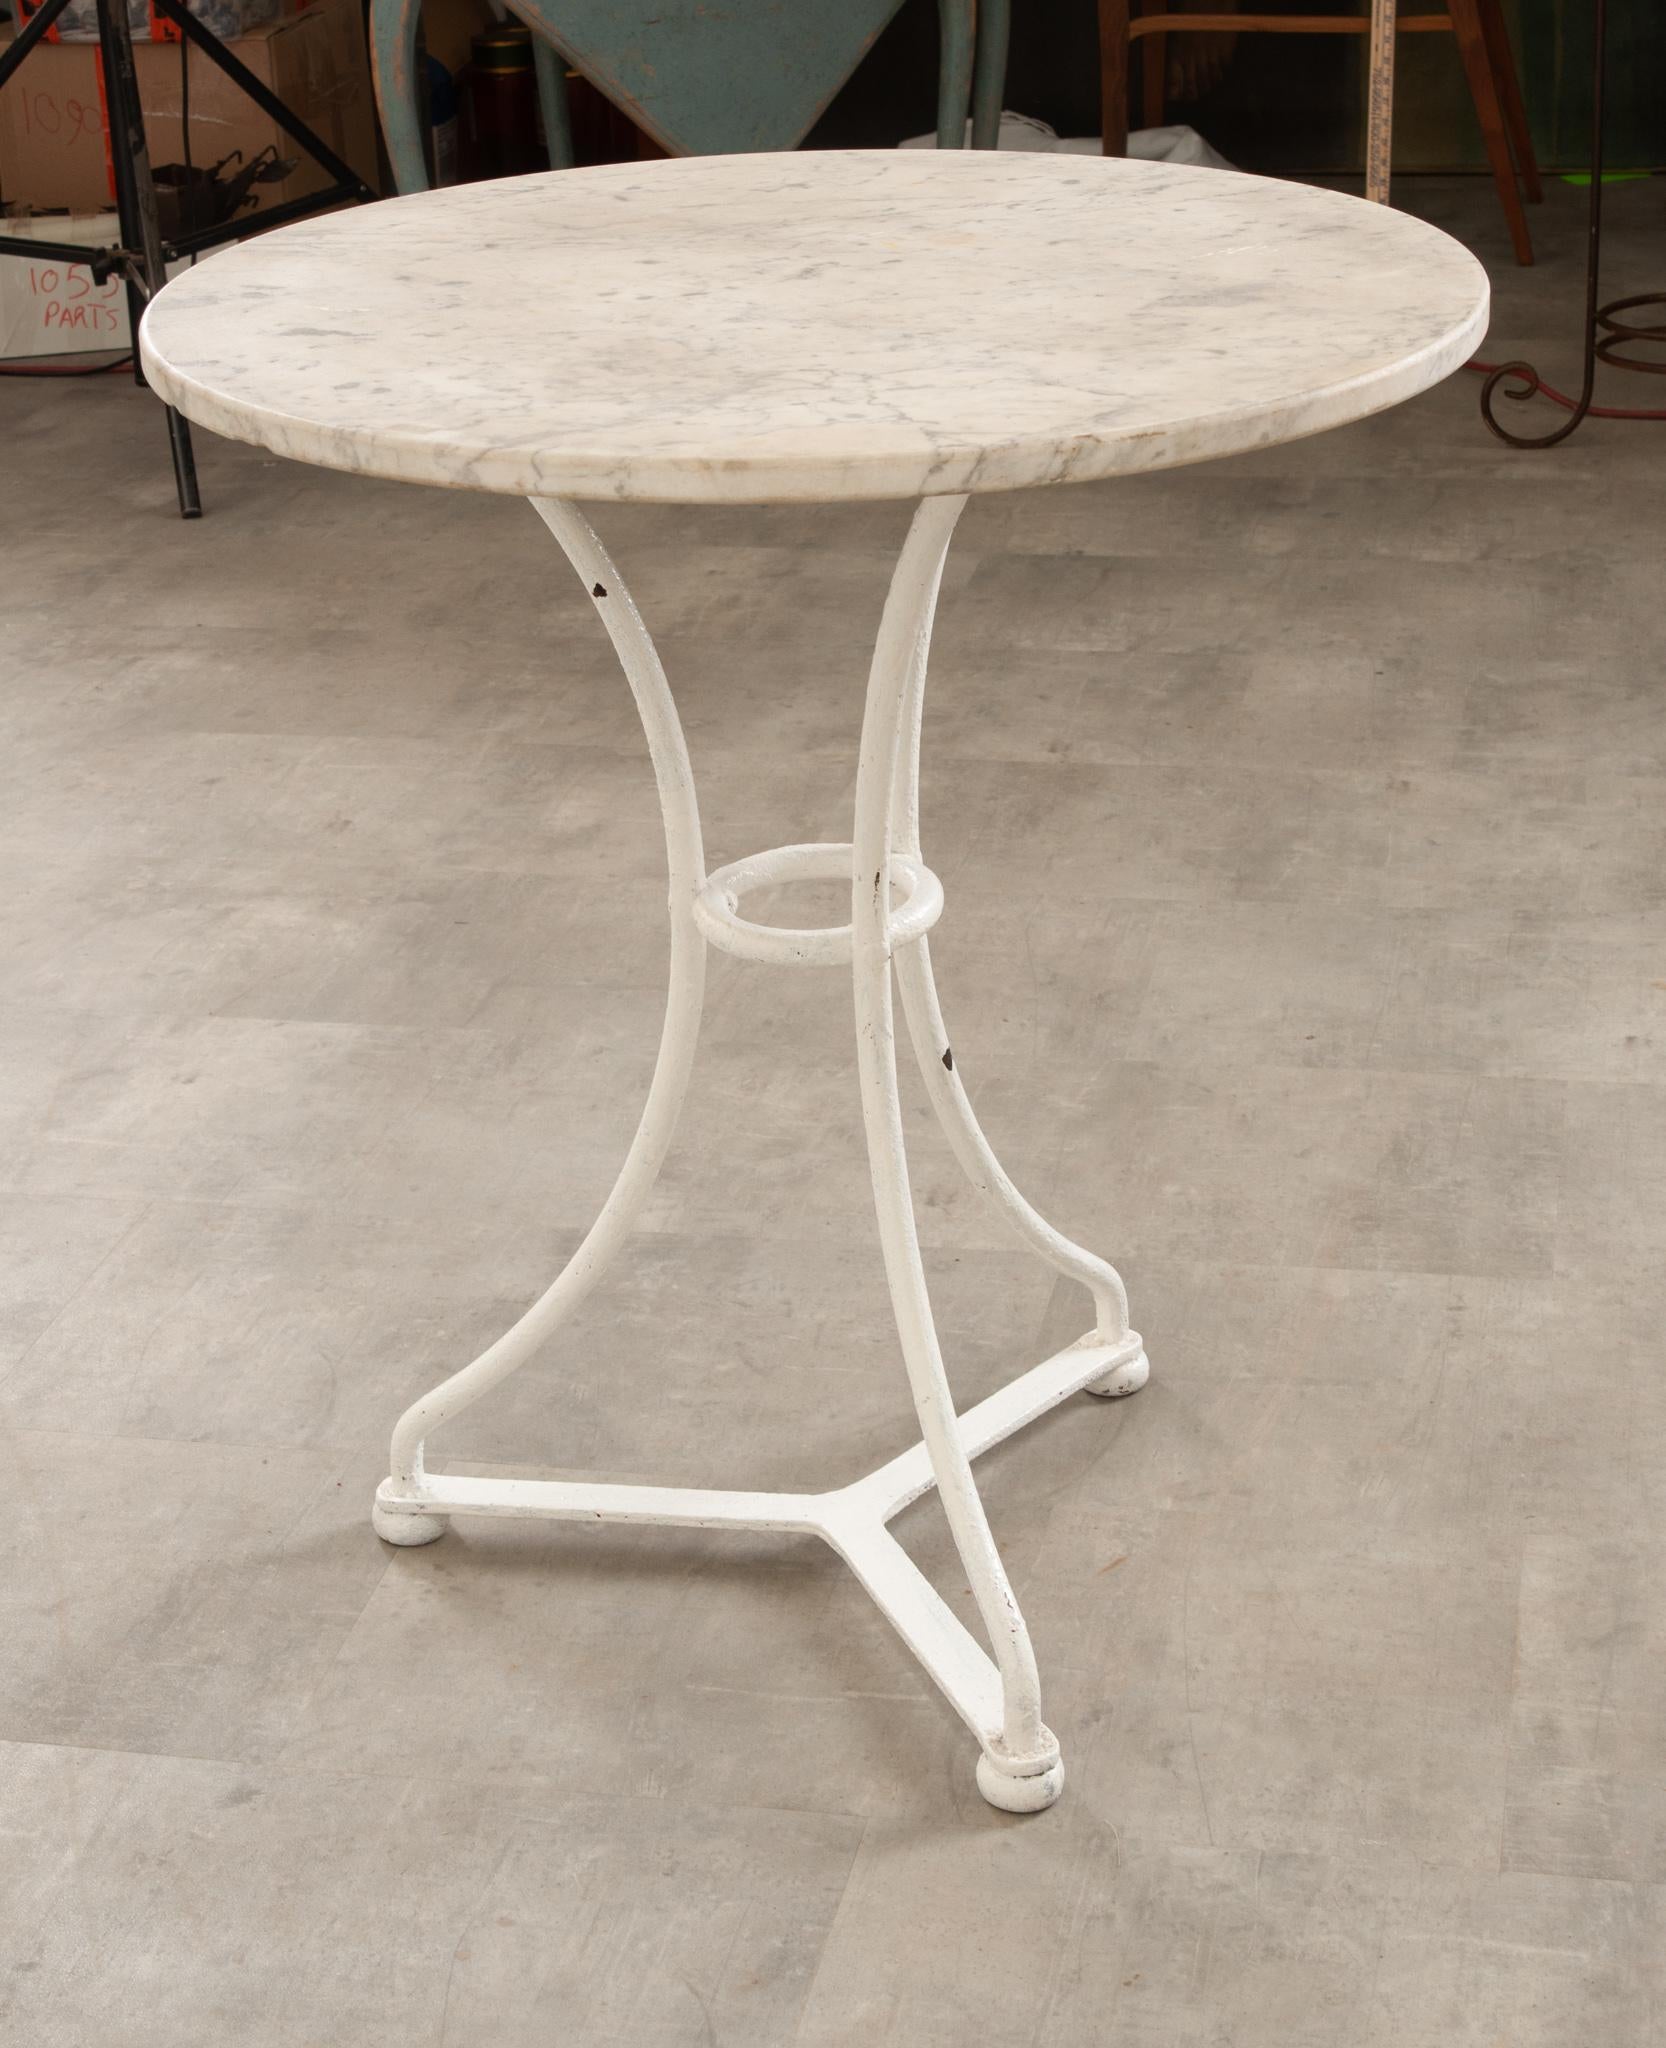 This petite vintage bistro table is perfect in any space! The worn white marble top is in great condition and beautifully compliments the white painted cast iron base. Three legs join at a center ring and at the feet with a three-prong bracket.